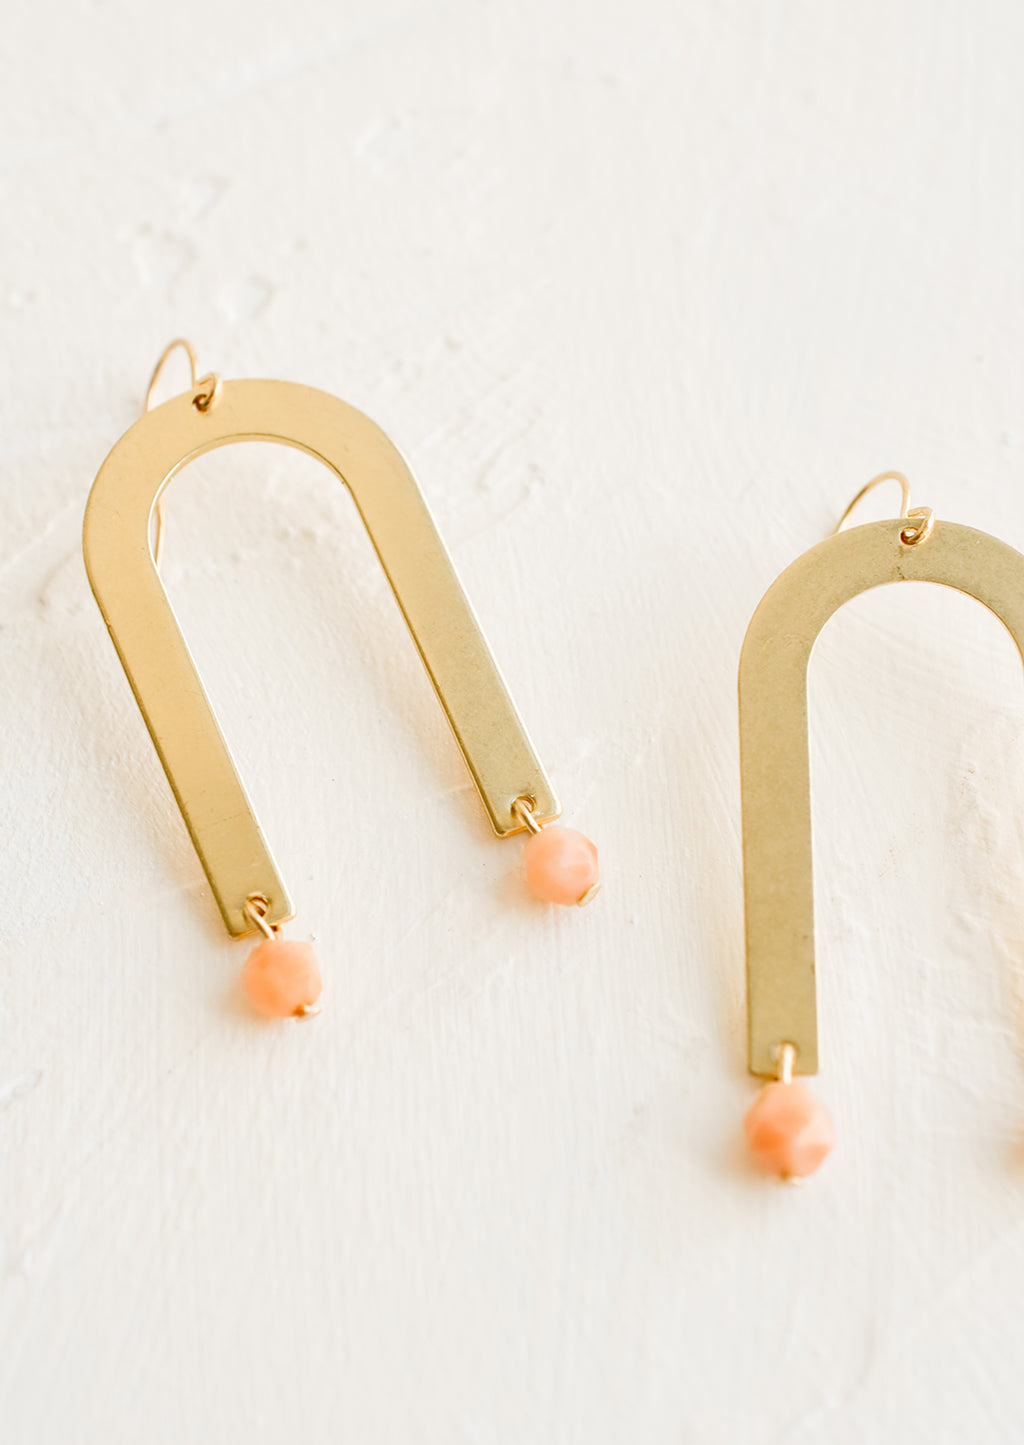 Sunstone: A pair of drop earrings with archway shape made of brass and pink gemstone beads at bottom.